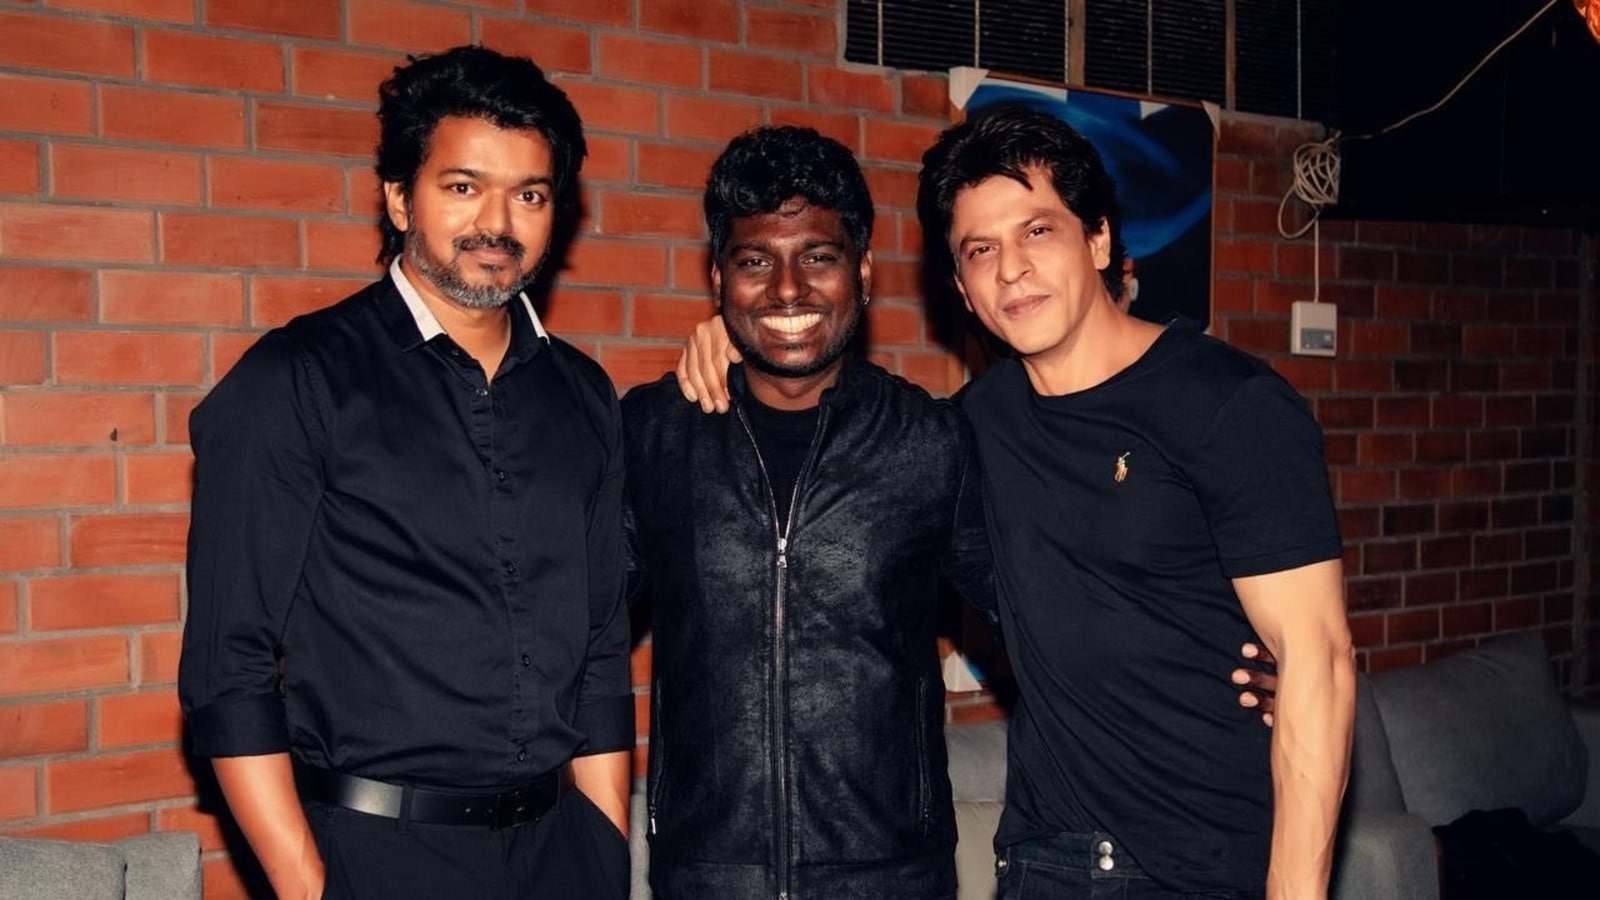 shah-rukh-khan-s-pic-with-vijay-at-atlee-s-birthday-bash-makes-fan-curious-thalapathy-s-cameo-is-confirmed-in-jawan